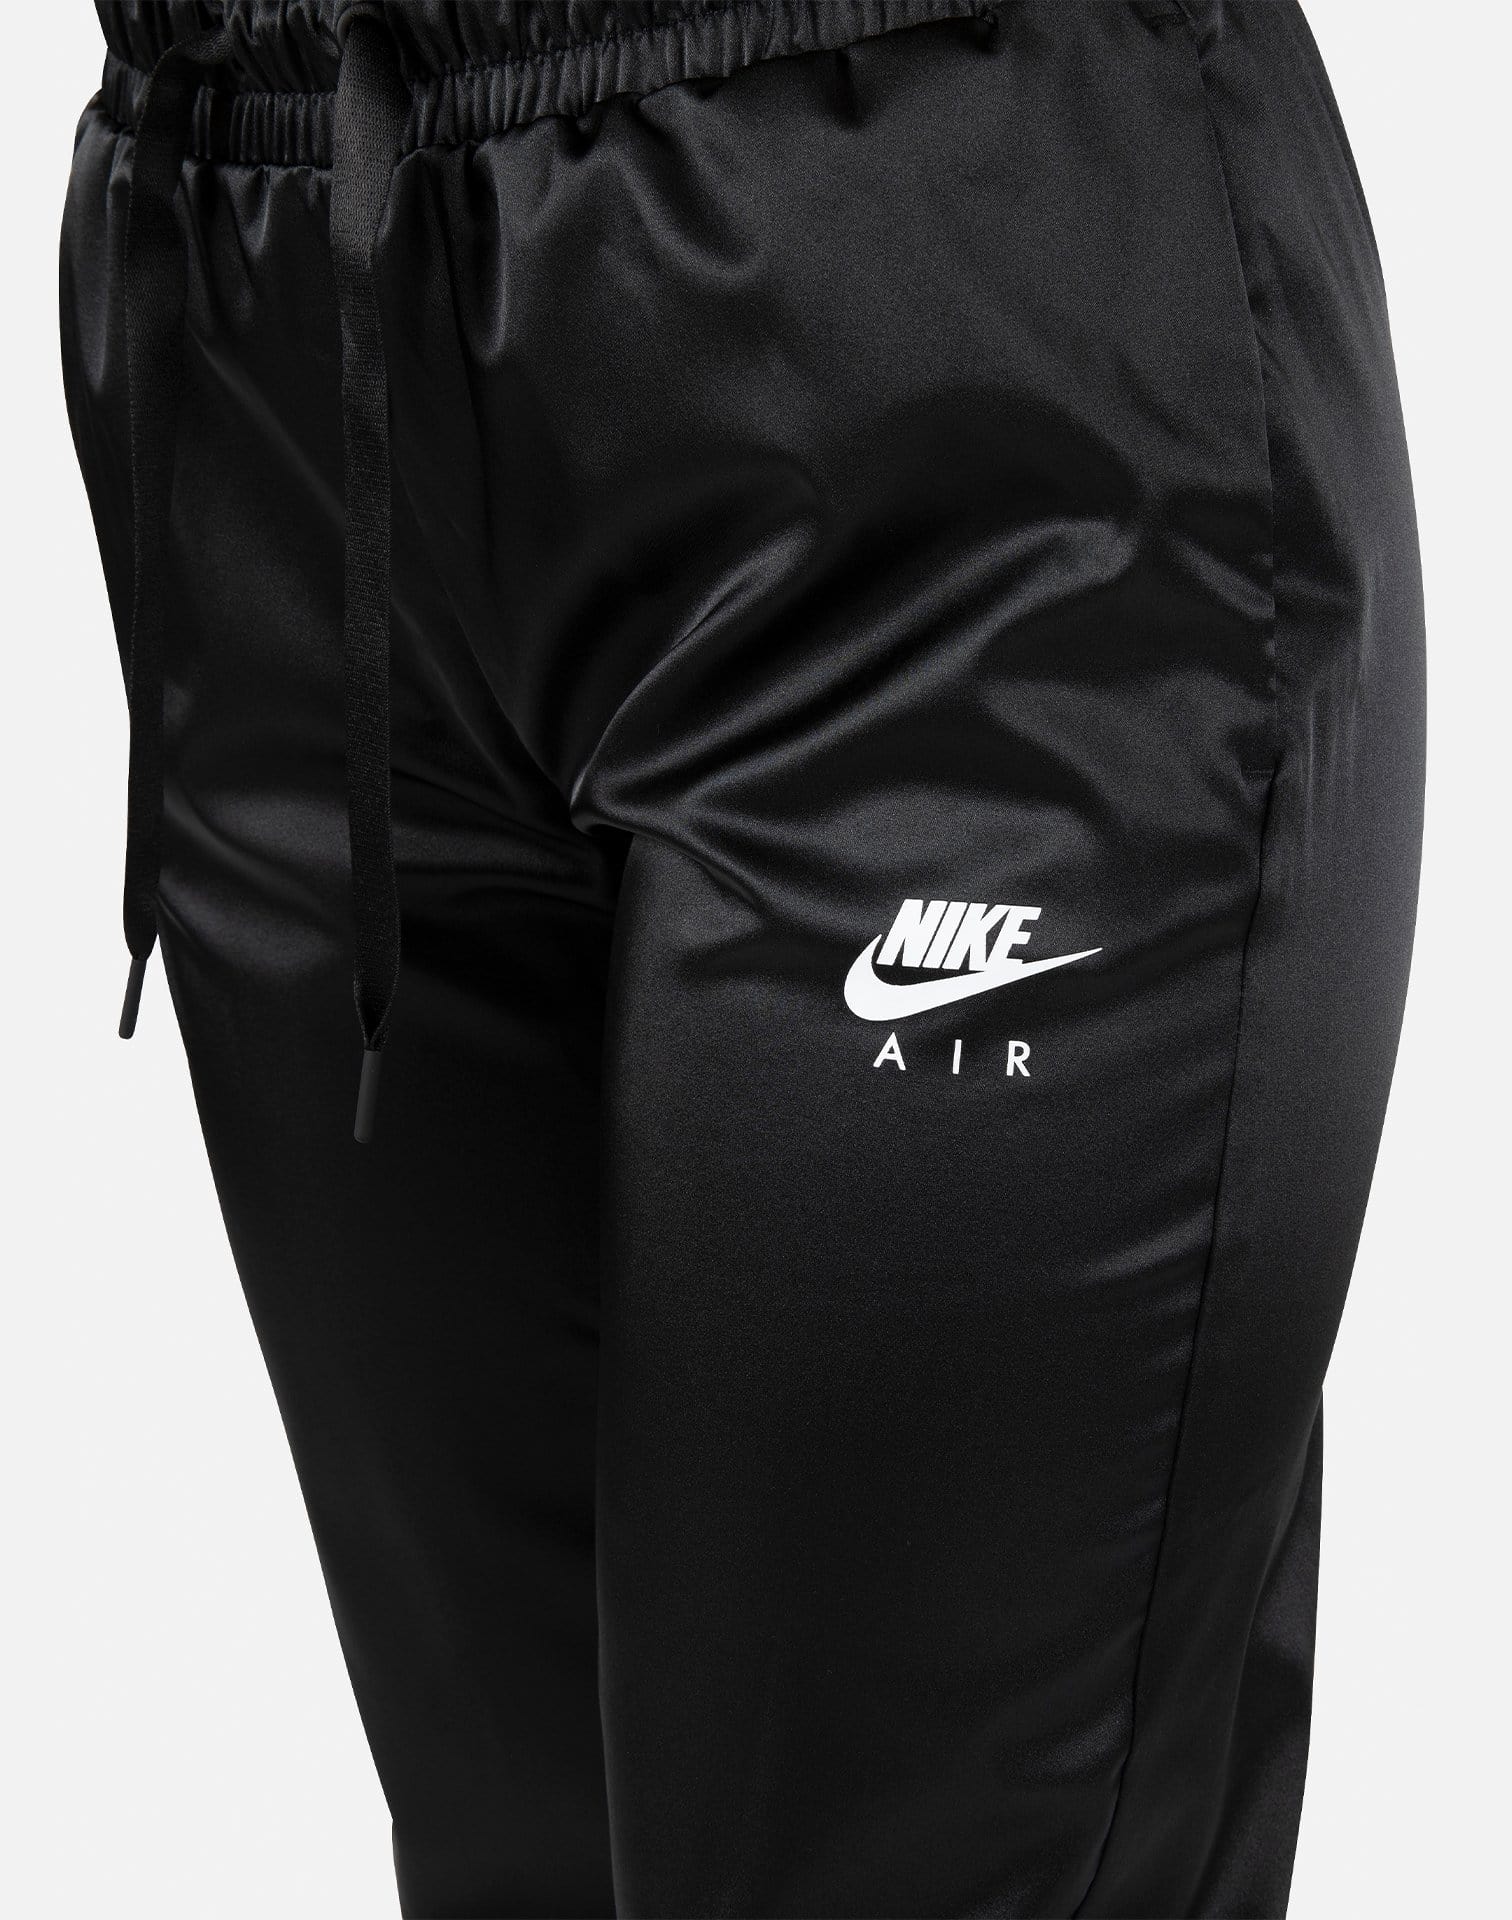 Nike Track Pants Womens Briefs Black Polyester 1421a9 - Buy Nike